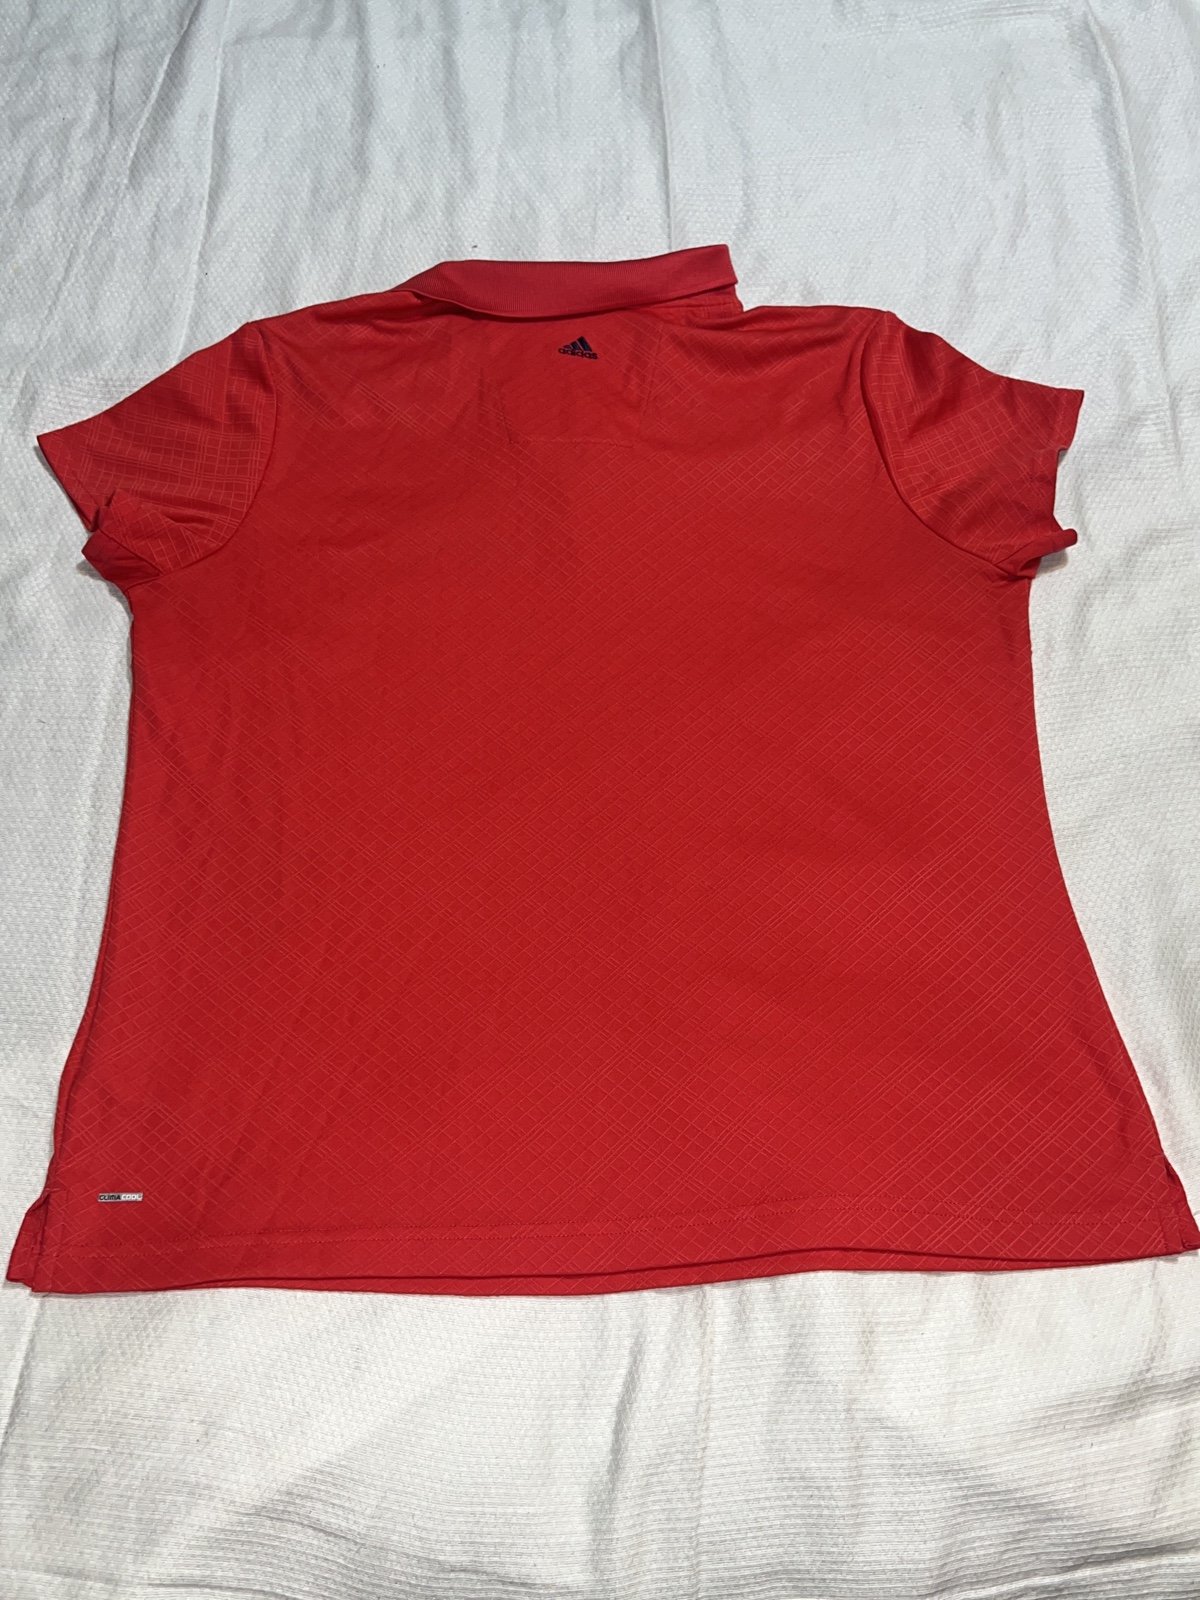 Discounted ADIDAS GOLF CLIMACOOL POLO SHIRT Red XL HCaqCXMrn Counter Genuine 